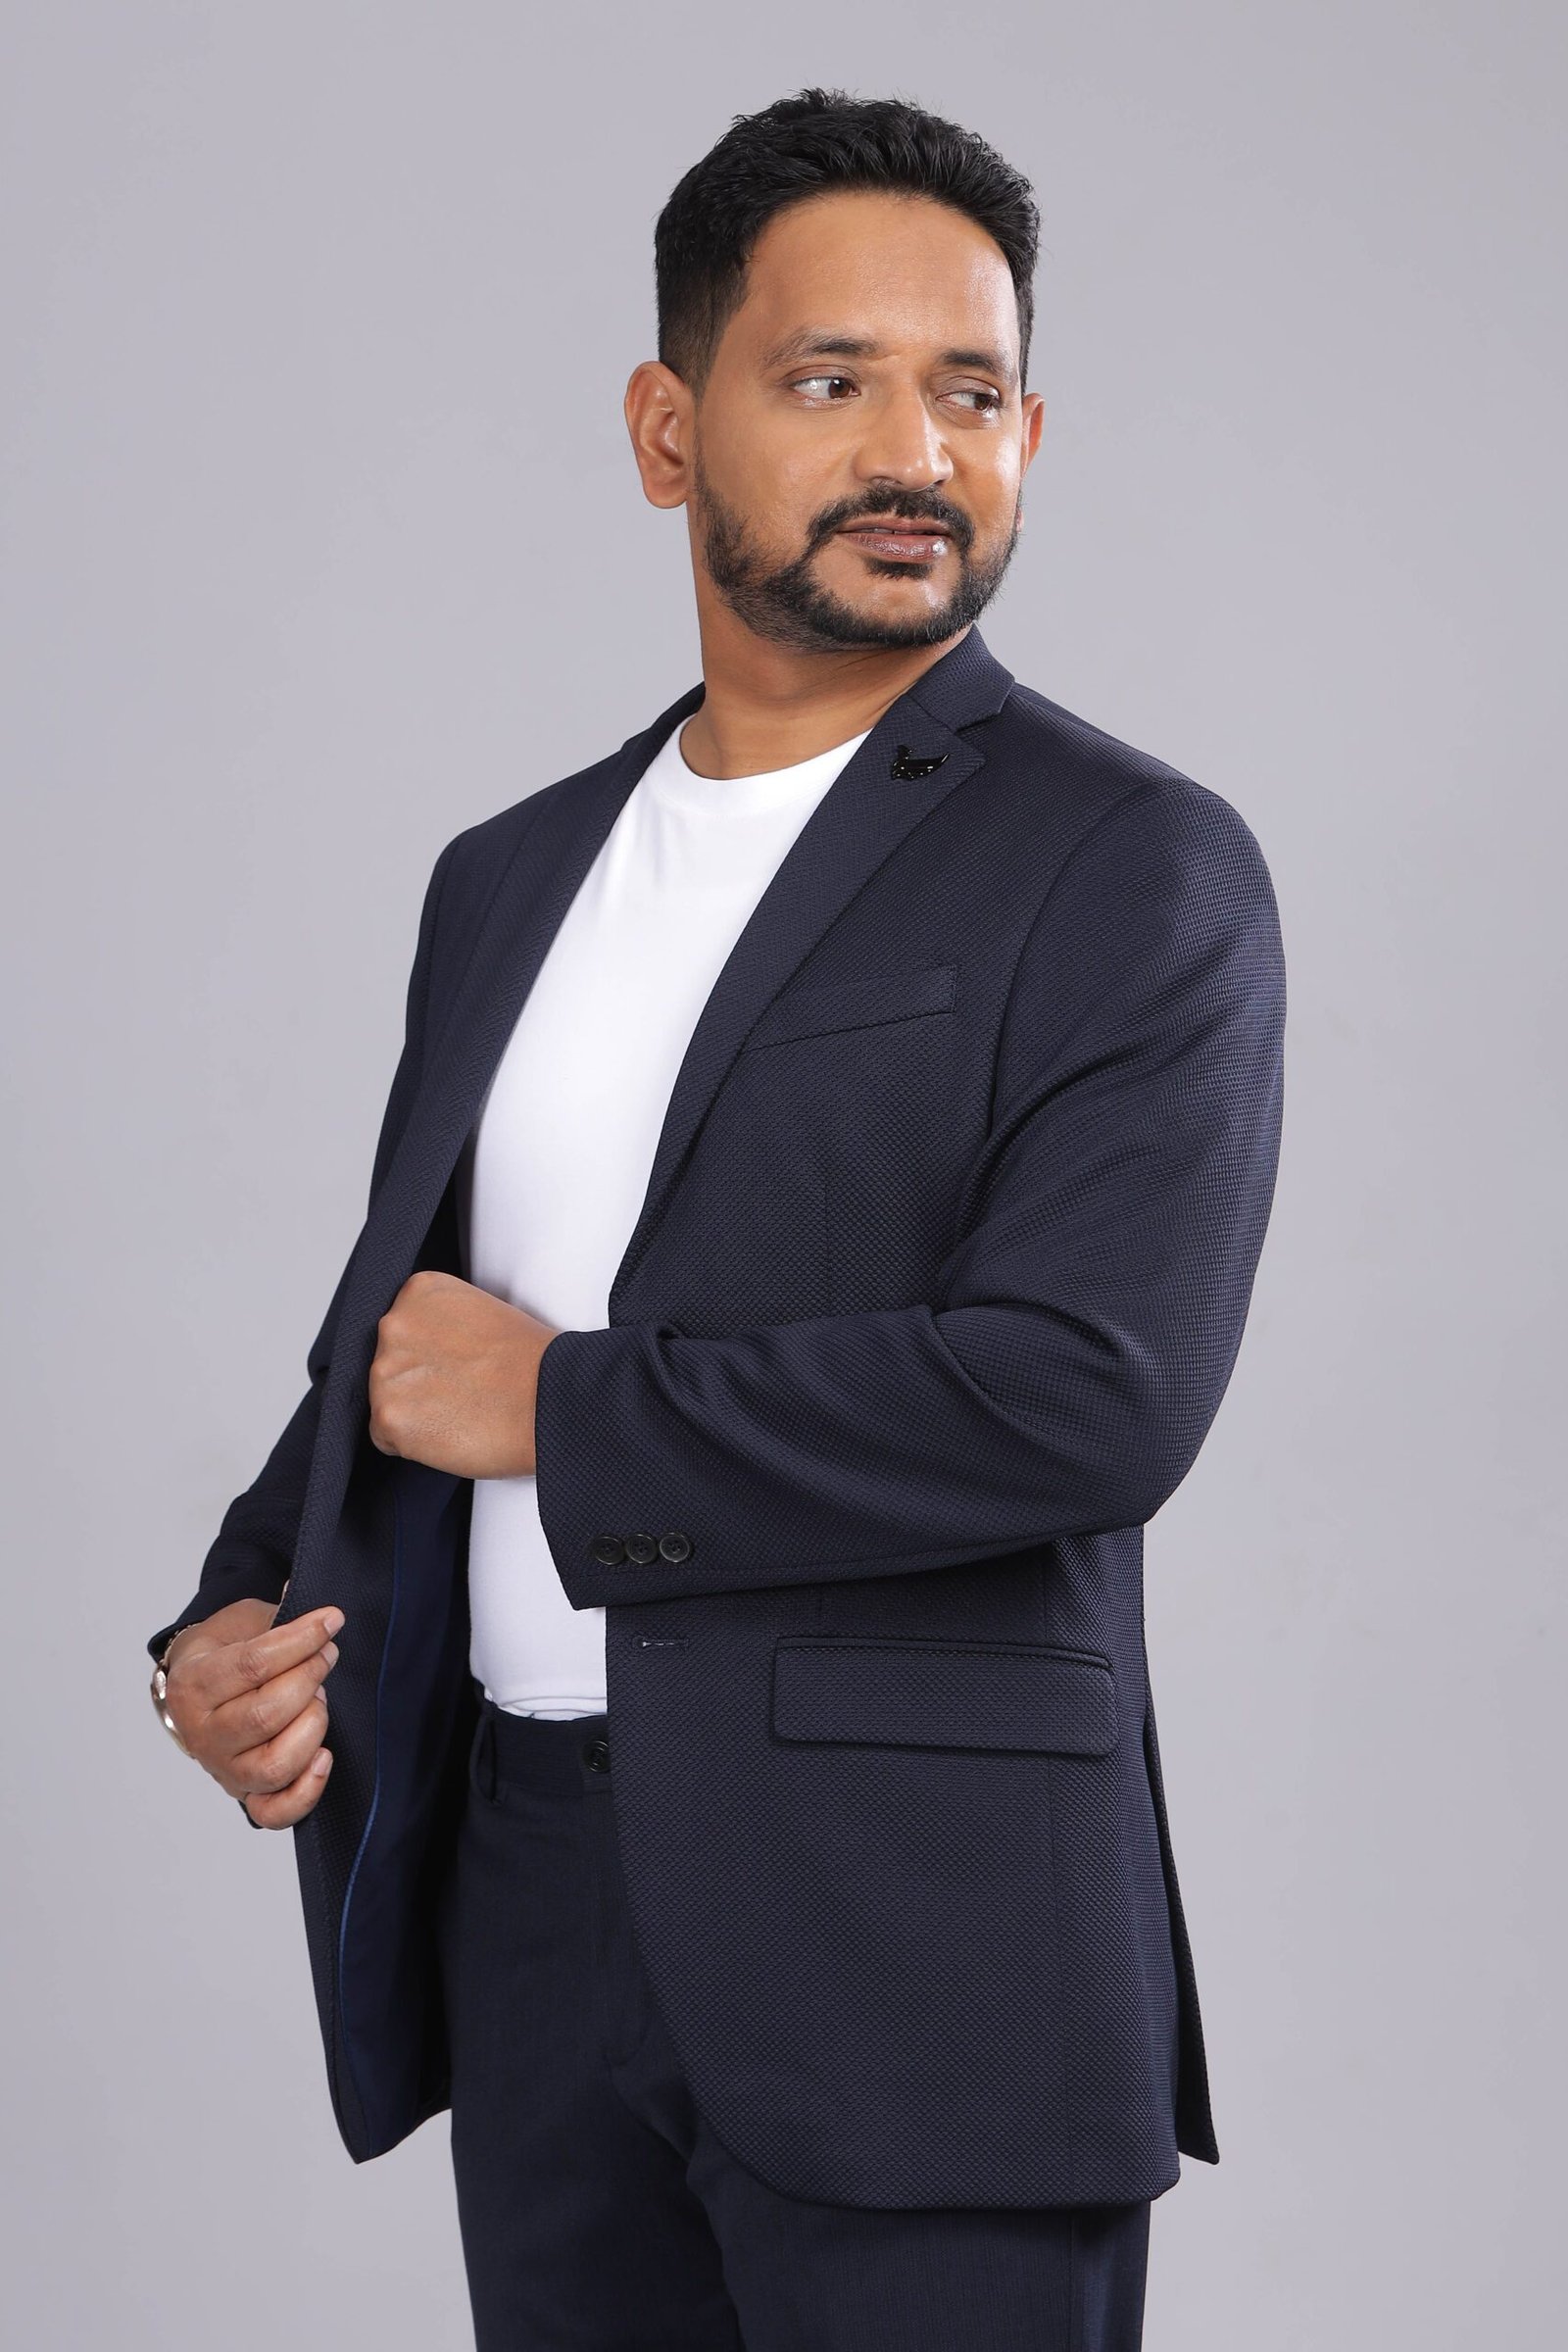 bhive ceo business shoot_-192